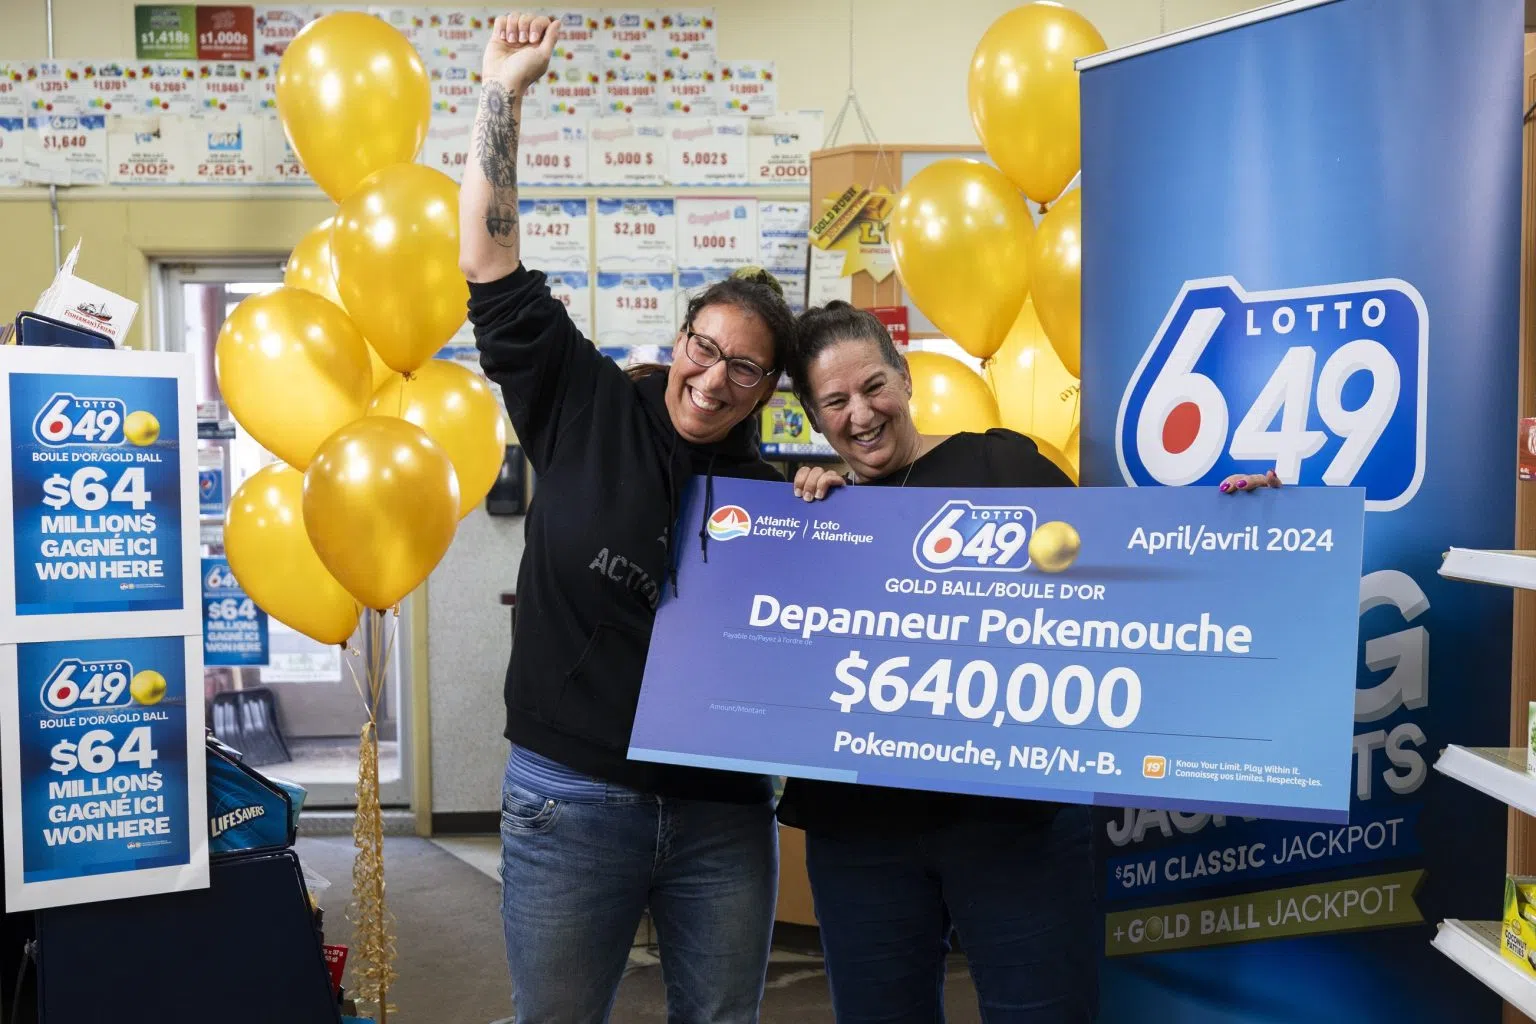 Store benefits from large Lotto 6/49 gold ball win